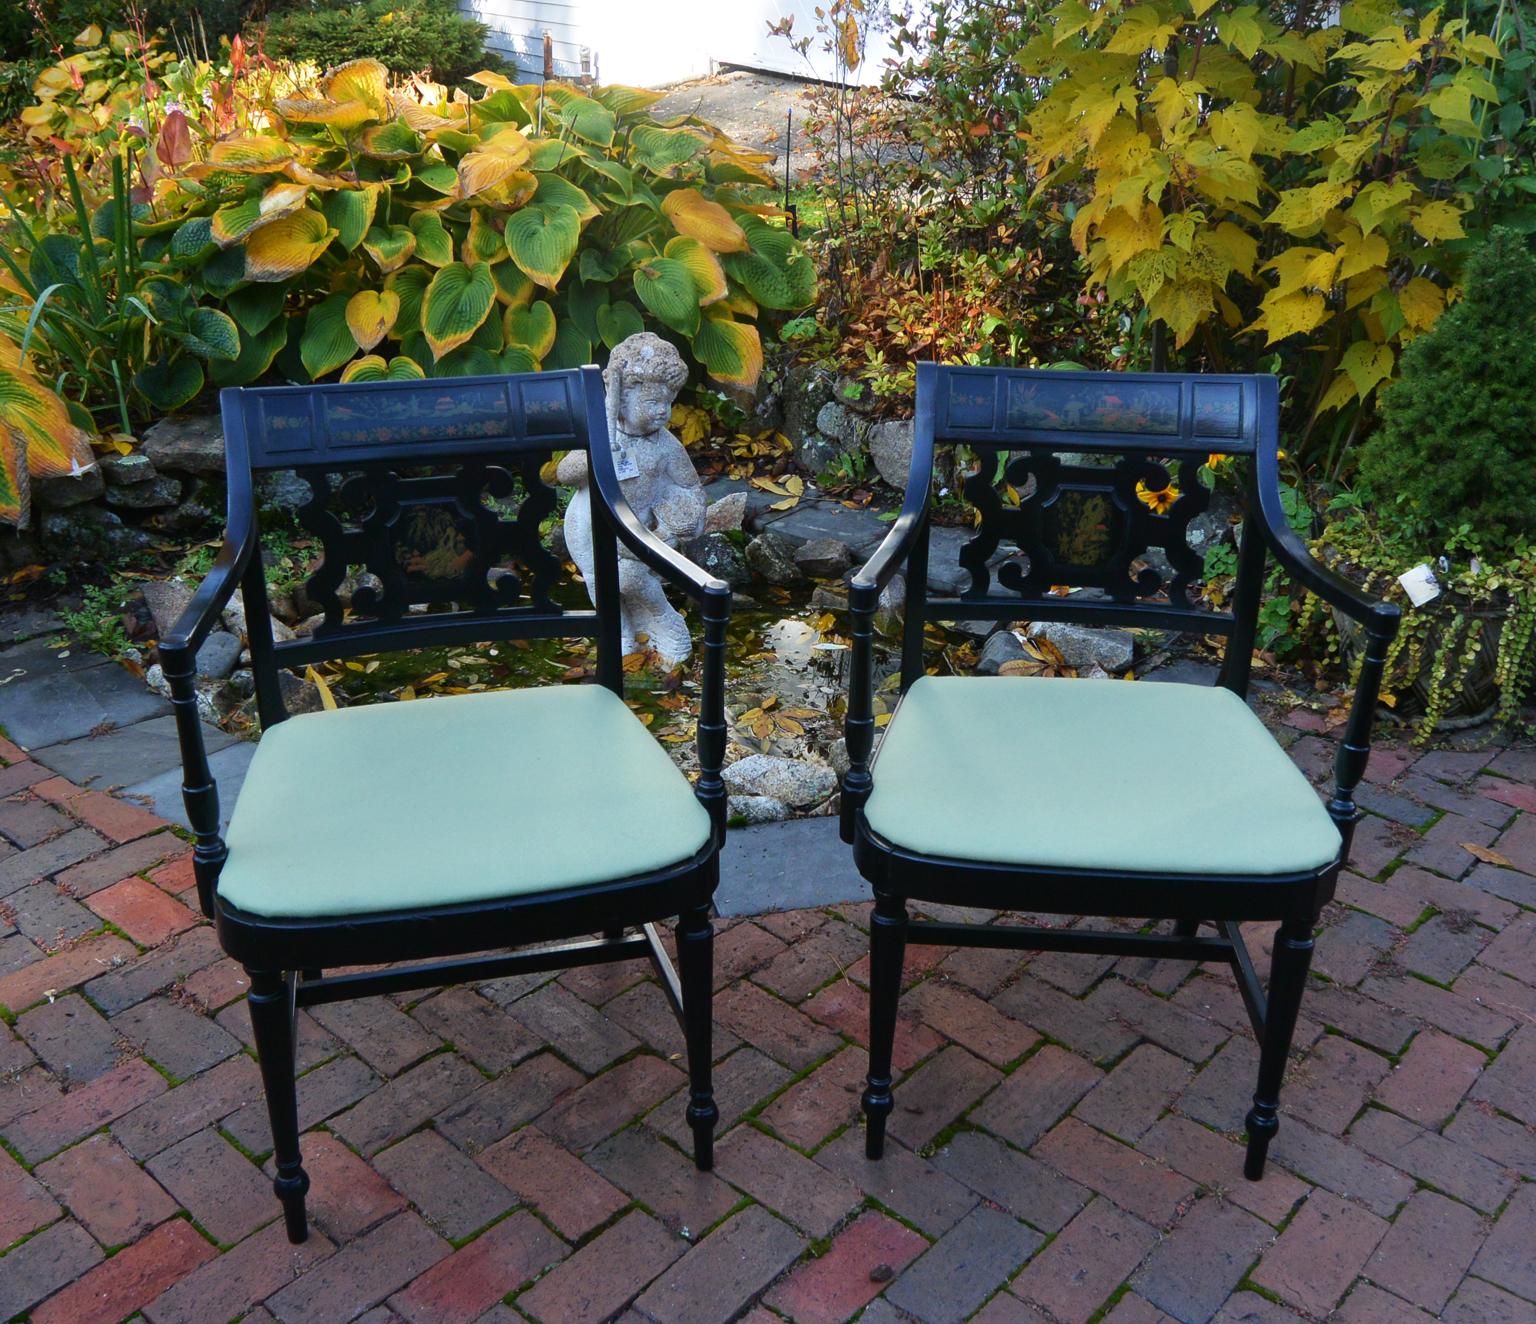 American Sheraton pair of mid 19th century armchairs, repainted in black with original chinoiserie decoration undisturbed.  This pair of chairs has had the slip seats replaced circa 1911 and have recently been reupholstered in celadon green.  The